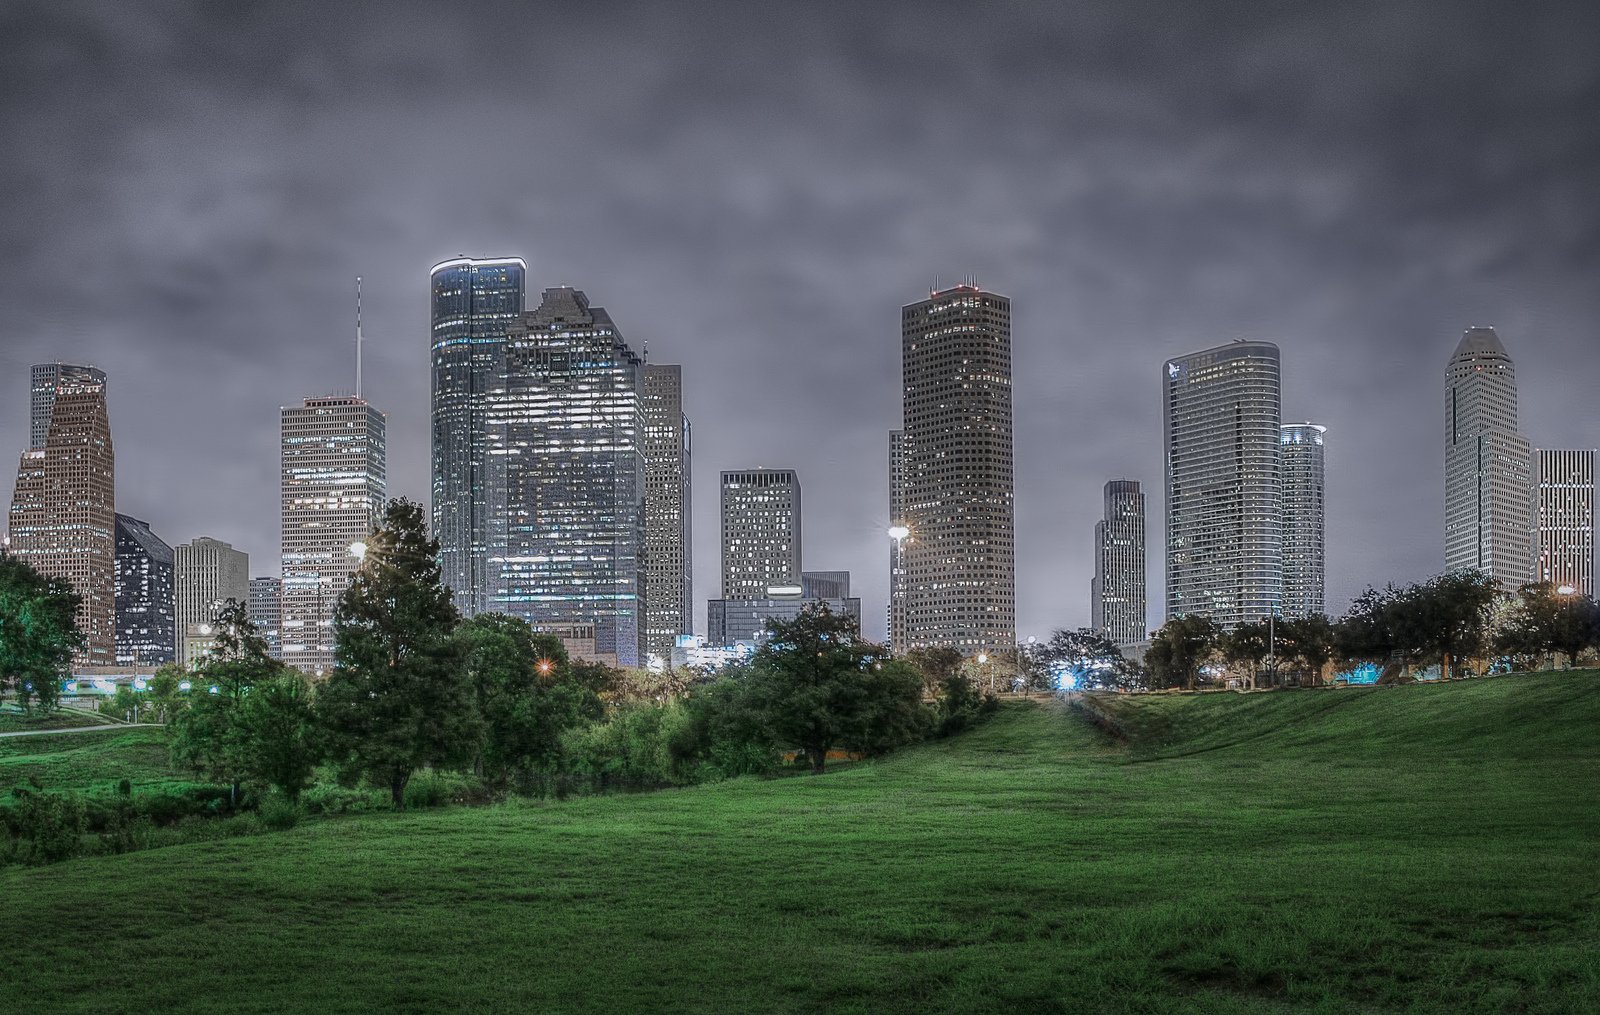 houston, Architecture, Bridges, Cities, City, Texas, Night, Towers, Buildings, Usa, Downtown, Offices, Storehouses, Stores Wallpaper